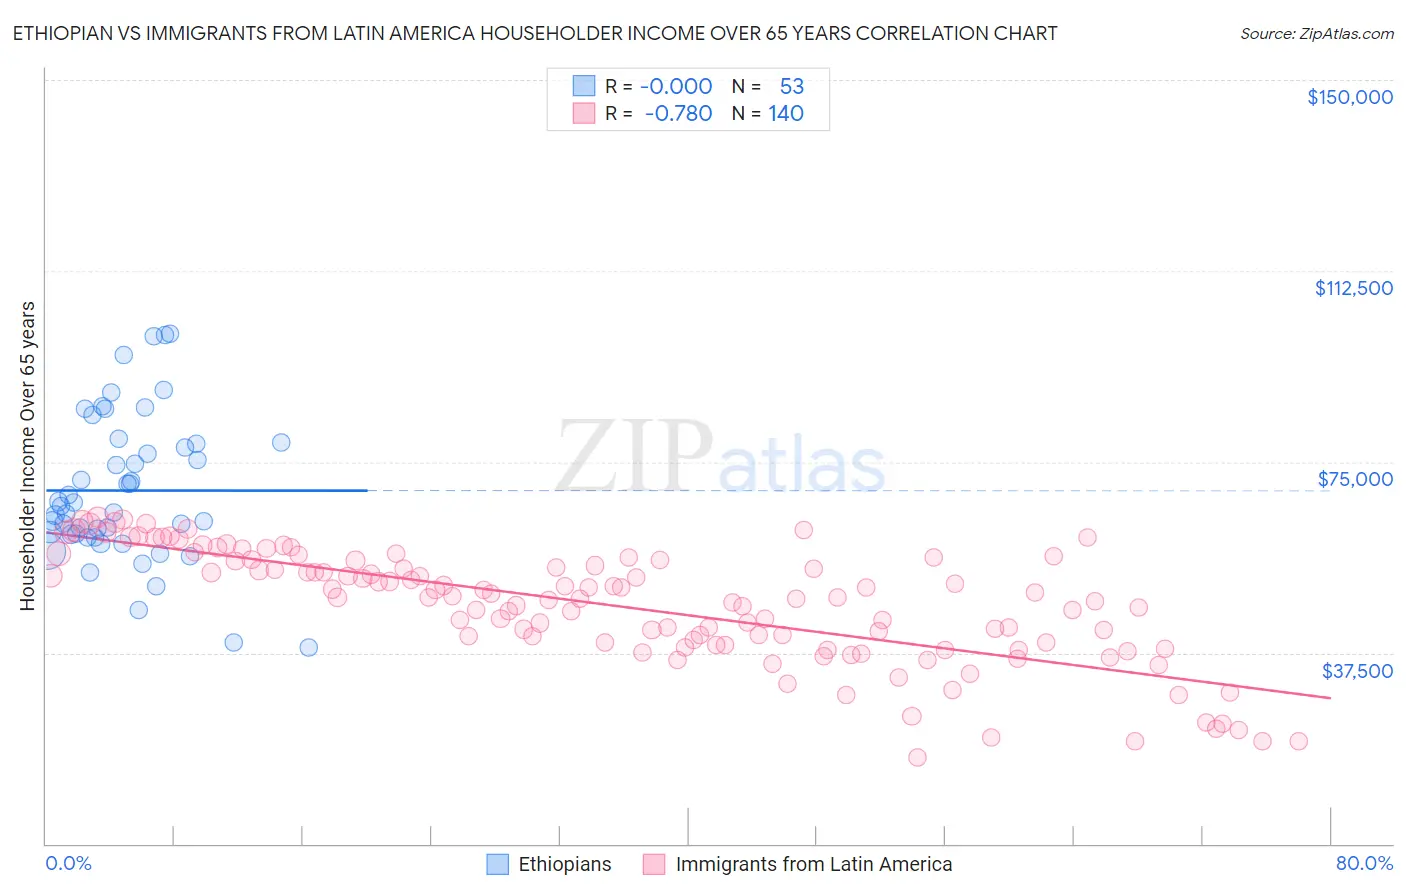 Ethiopian vs Immigrants from Latin America Householder Income Over 65 years